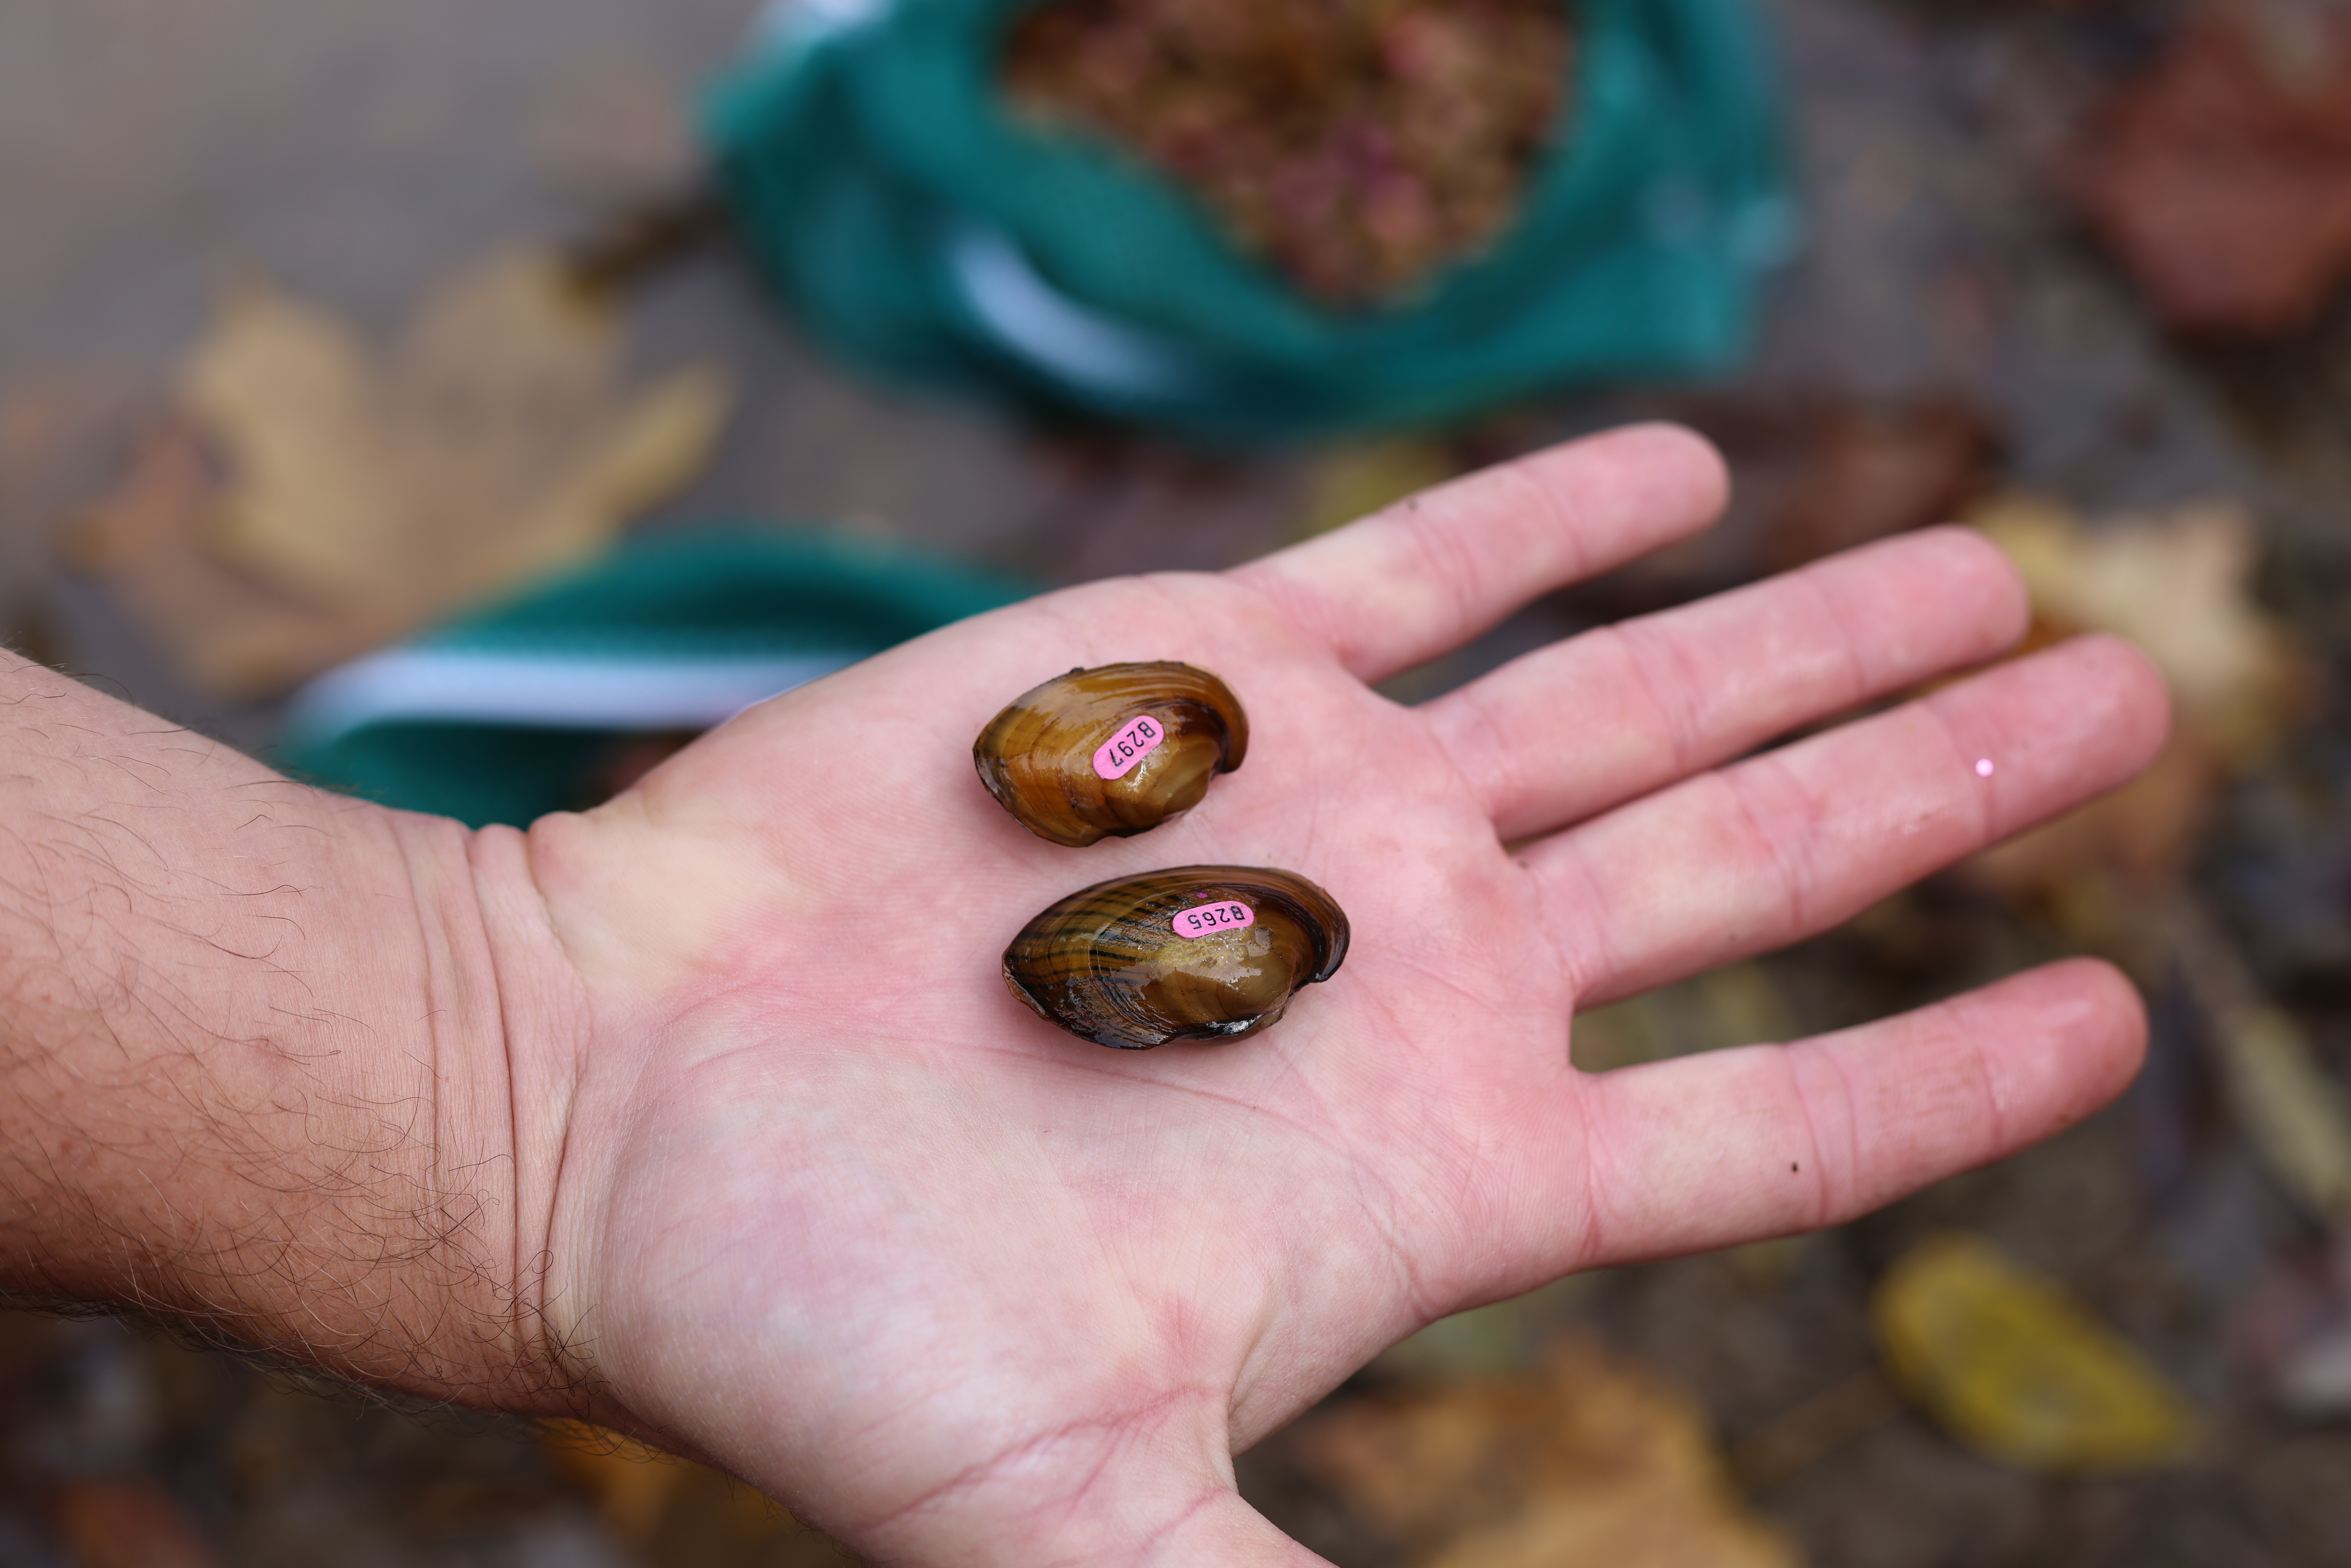 Man's hand holding two species of mussels that were raised by the Pennsylvania Fish and Boat Commission